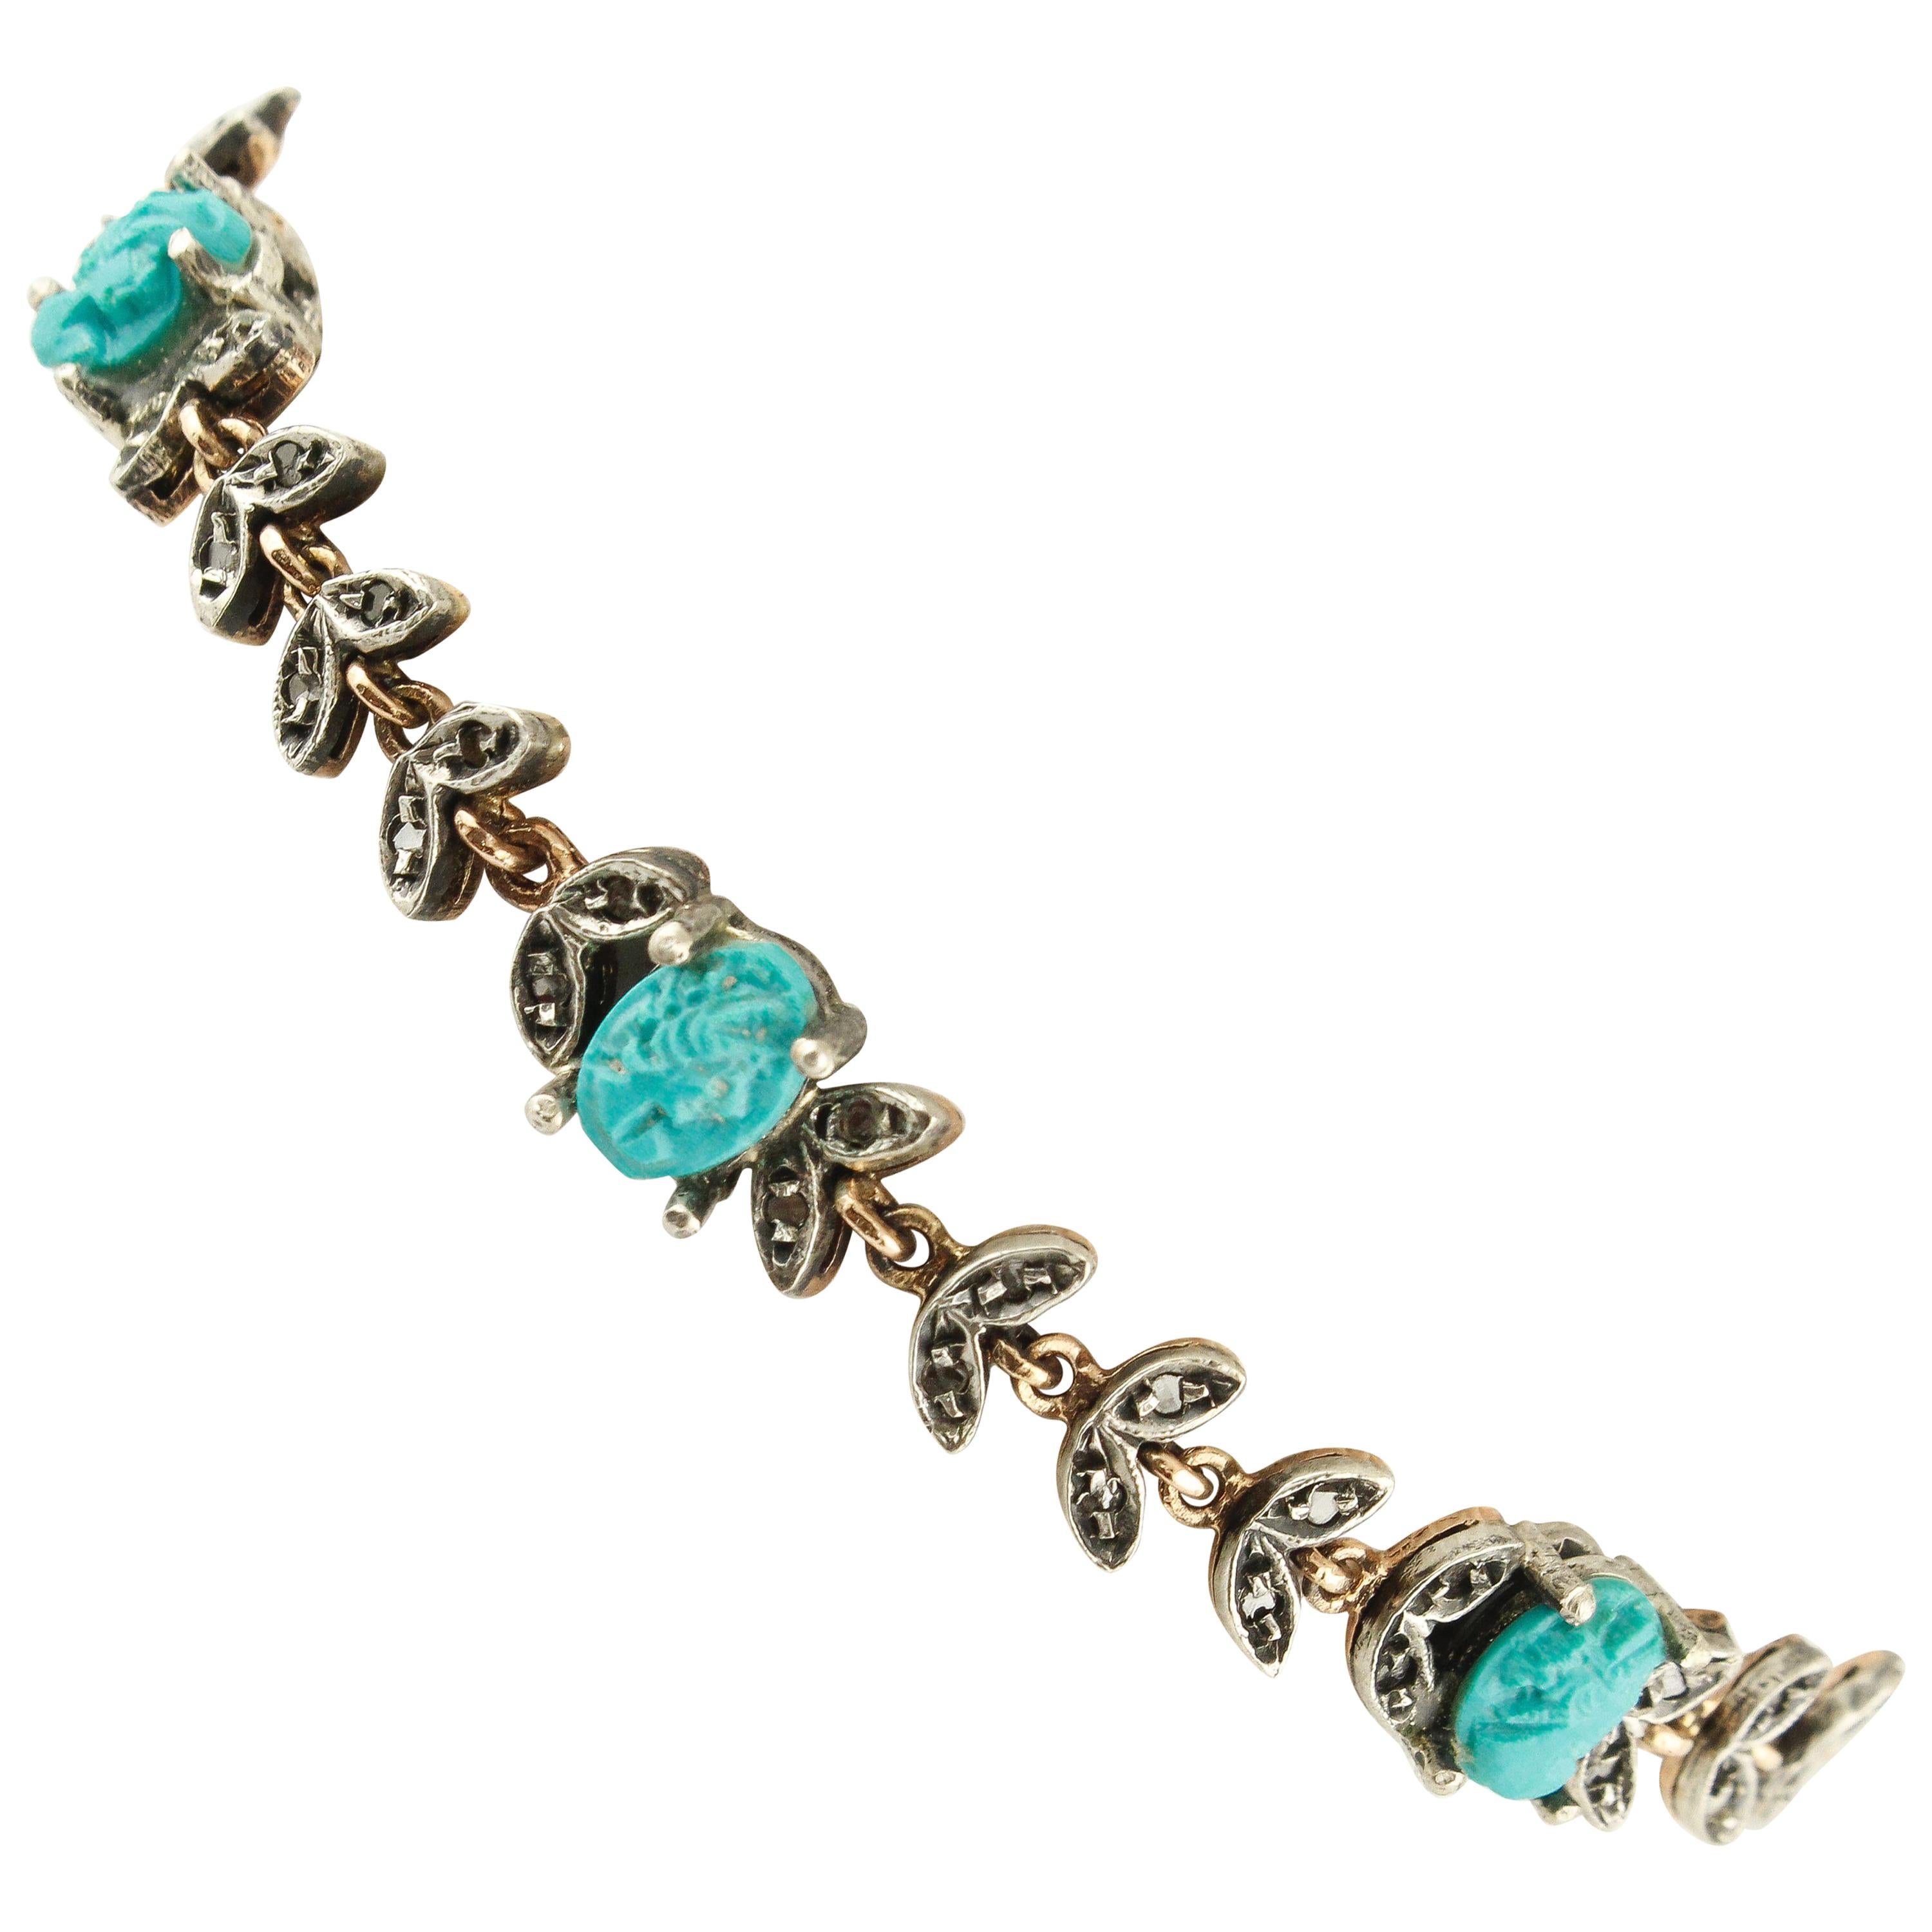 Micro-Sculptures of Turquoise, Diamonds Rose Gold and Silver Link Bracelet